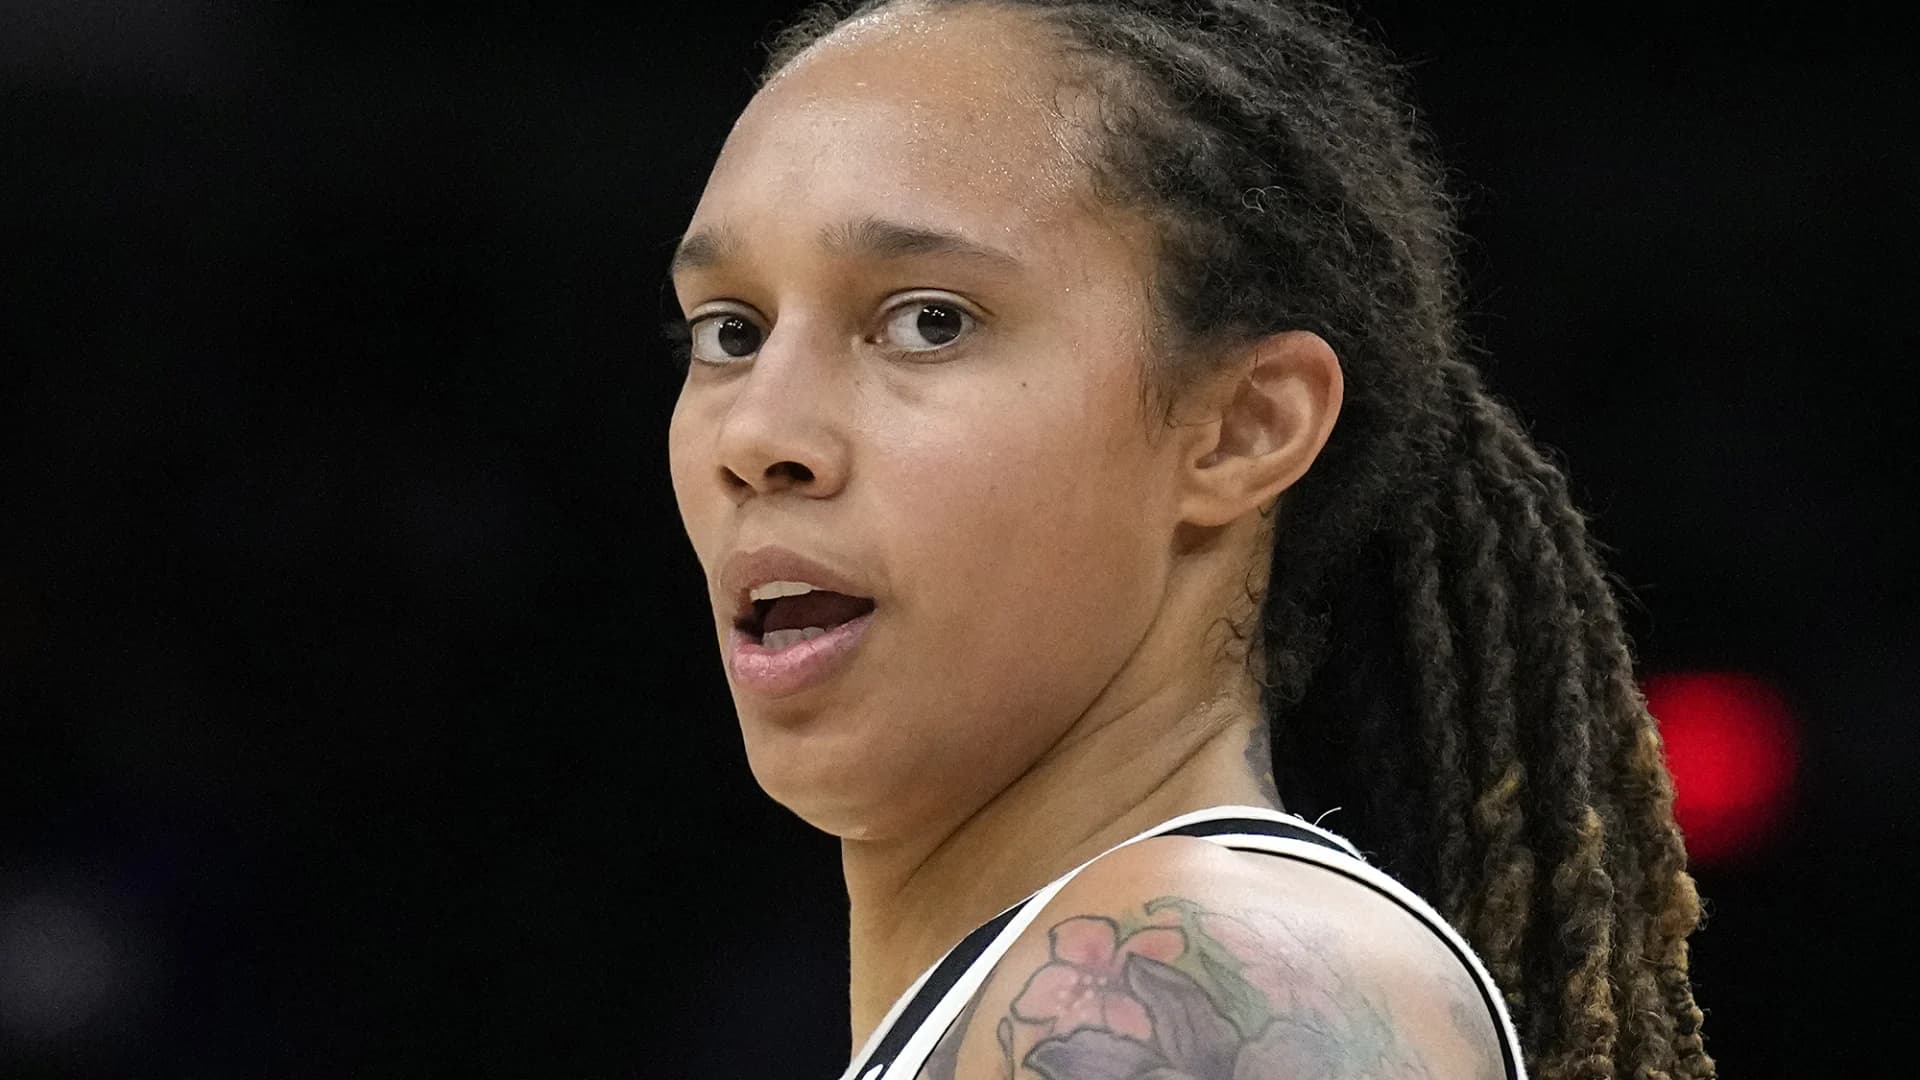 WNBA star Griner's Russia detention extended for third time